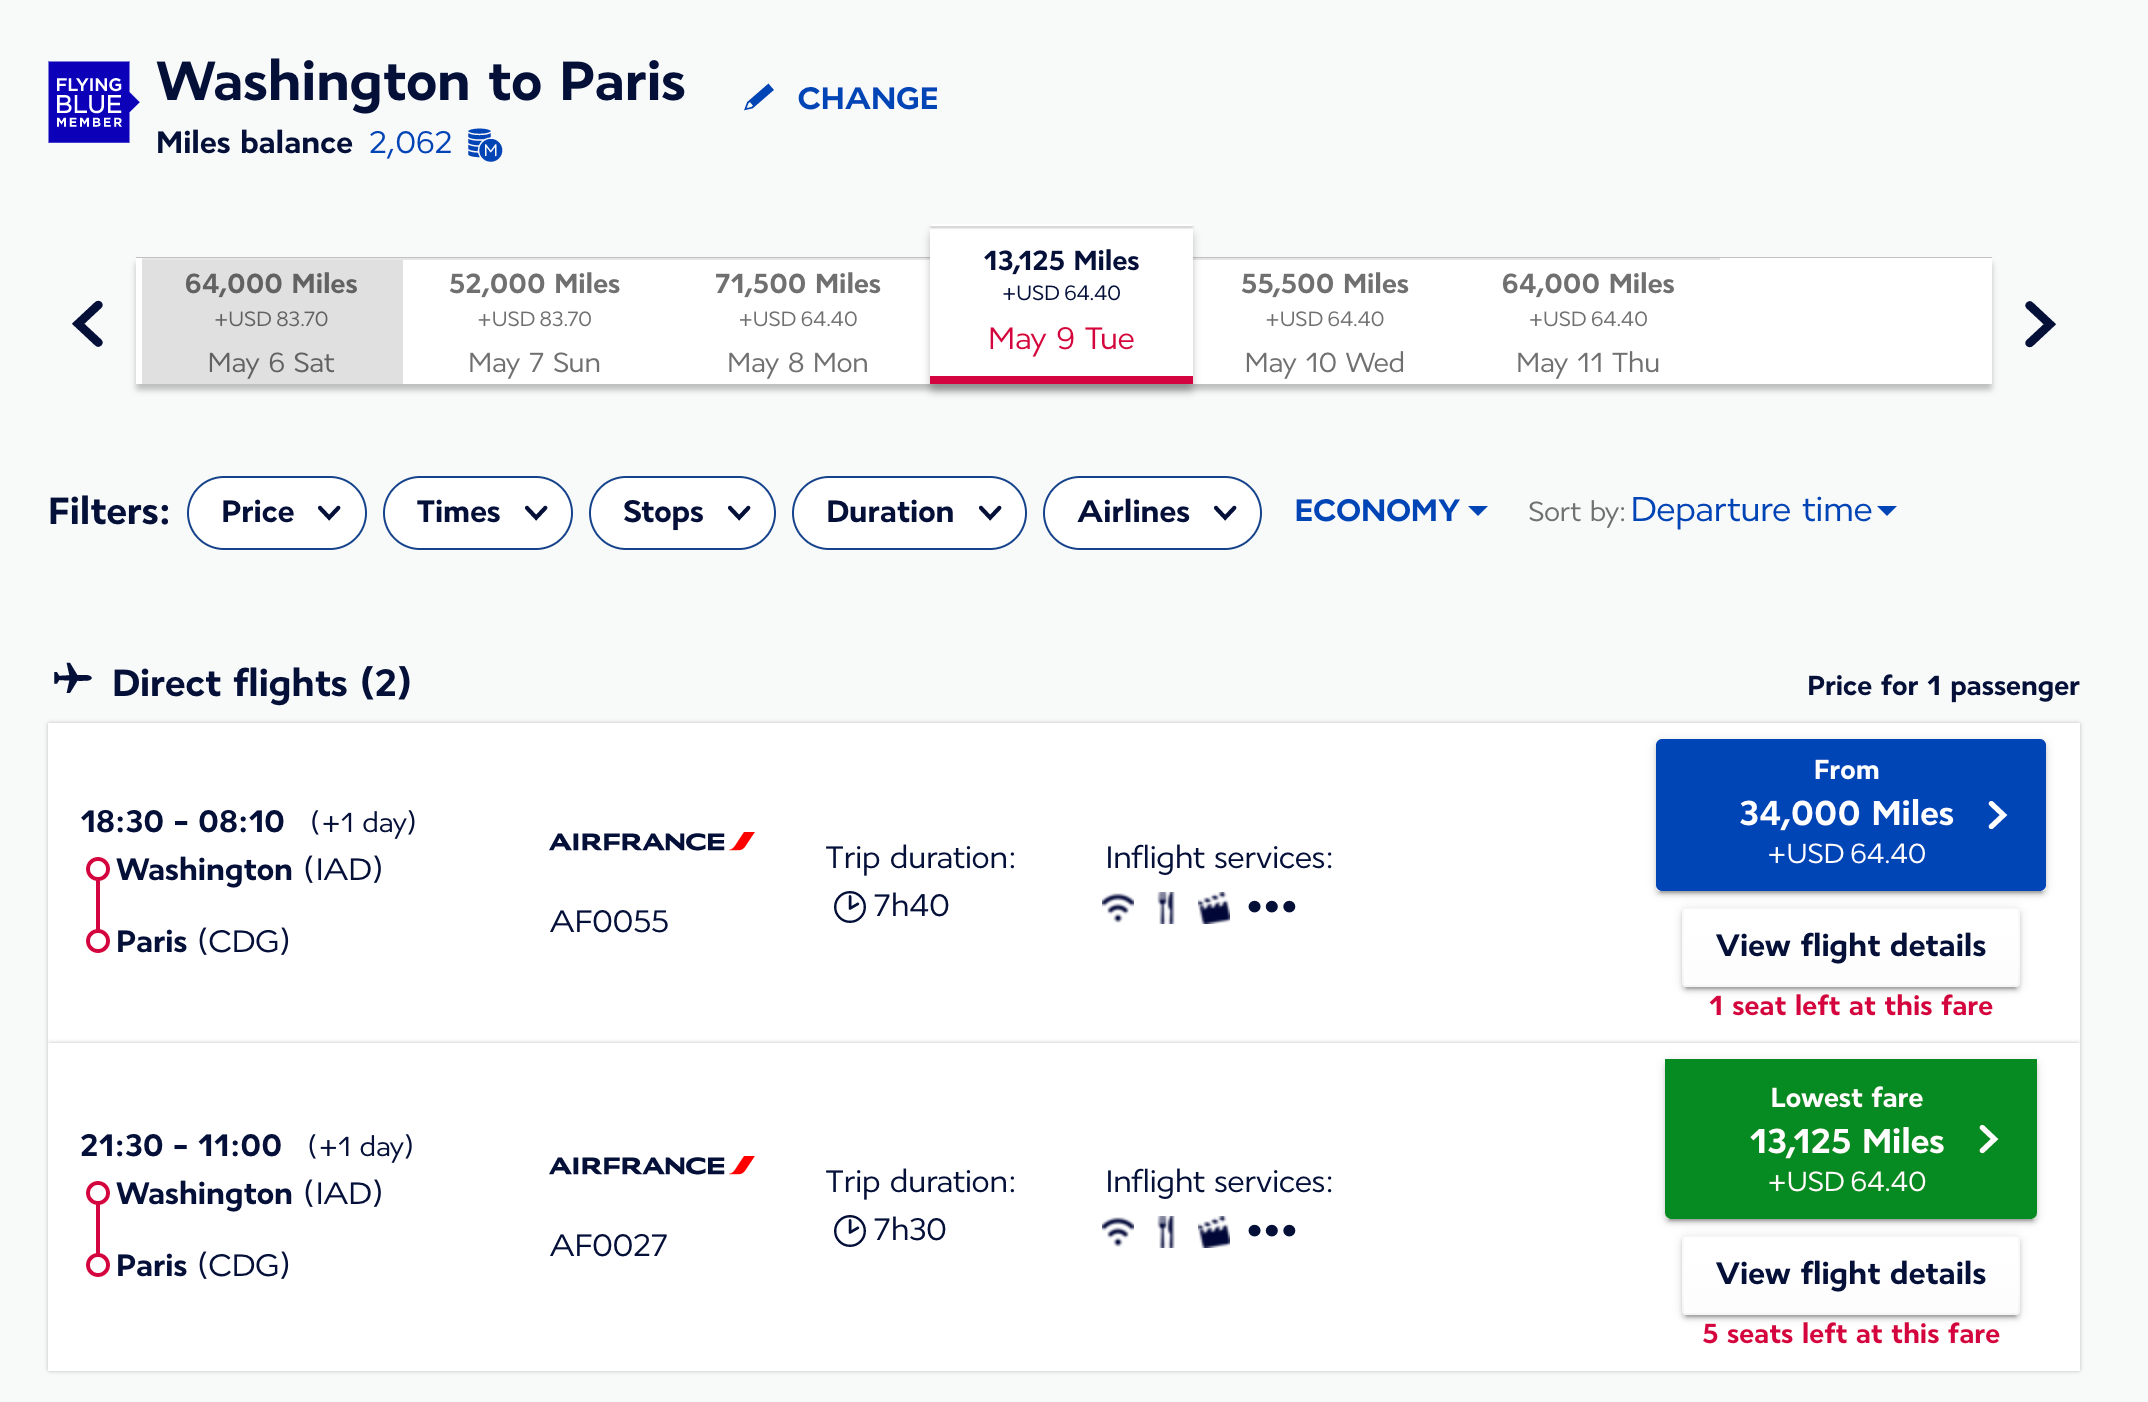 Flying Blue Air France Economy Promo fare to Paris.